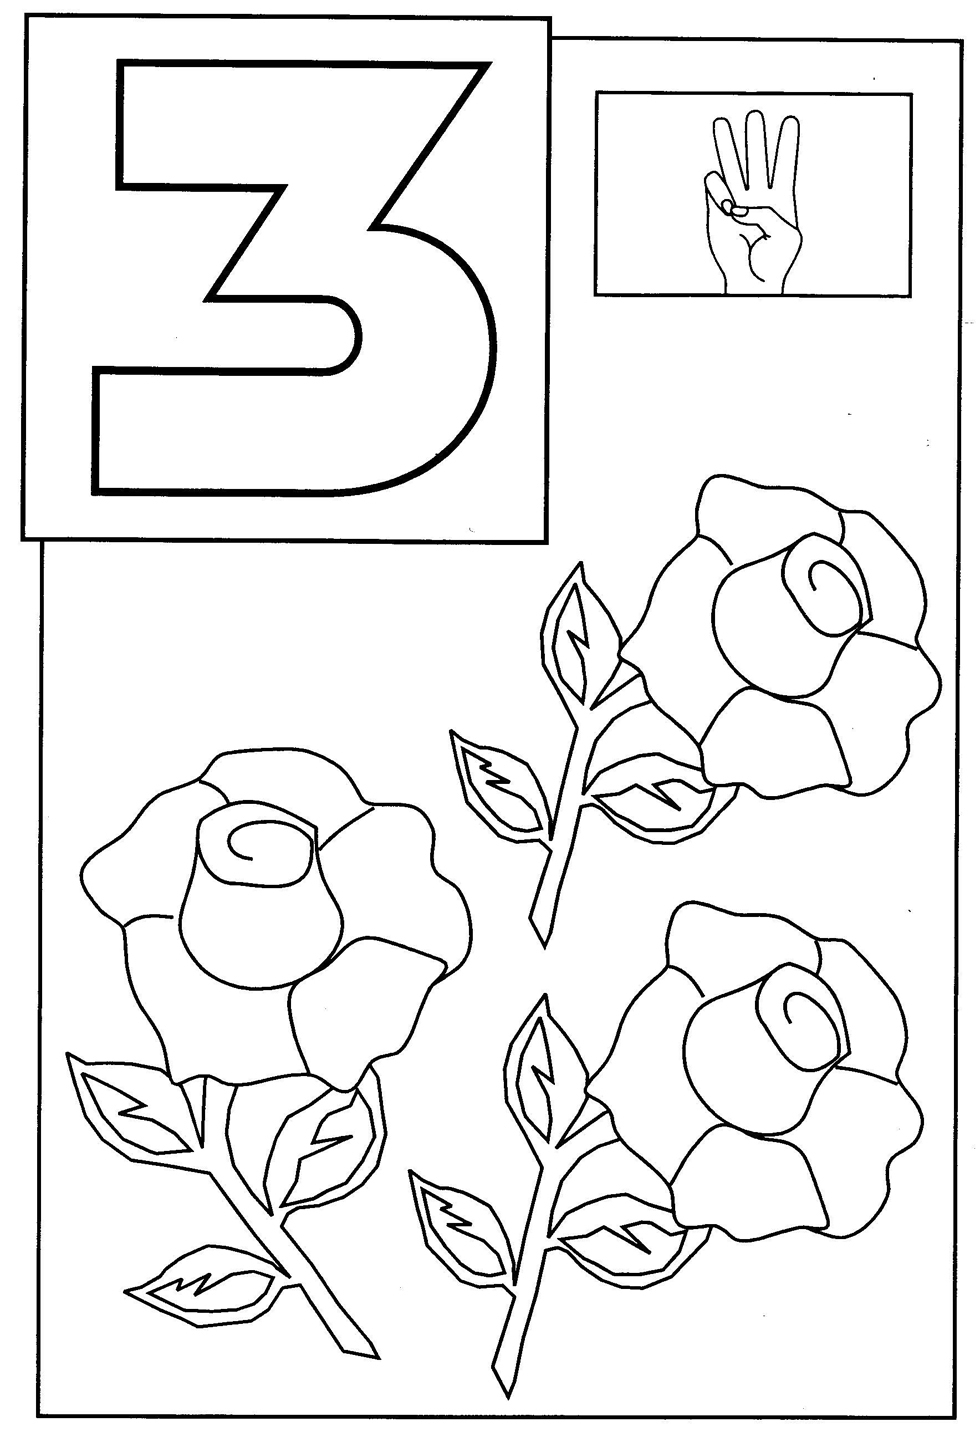 Number Coloring Pages For Toddlers at GetDrawings | Free download